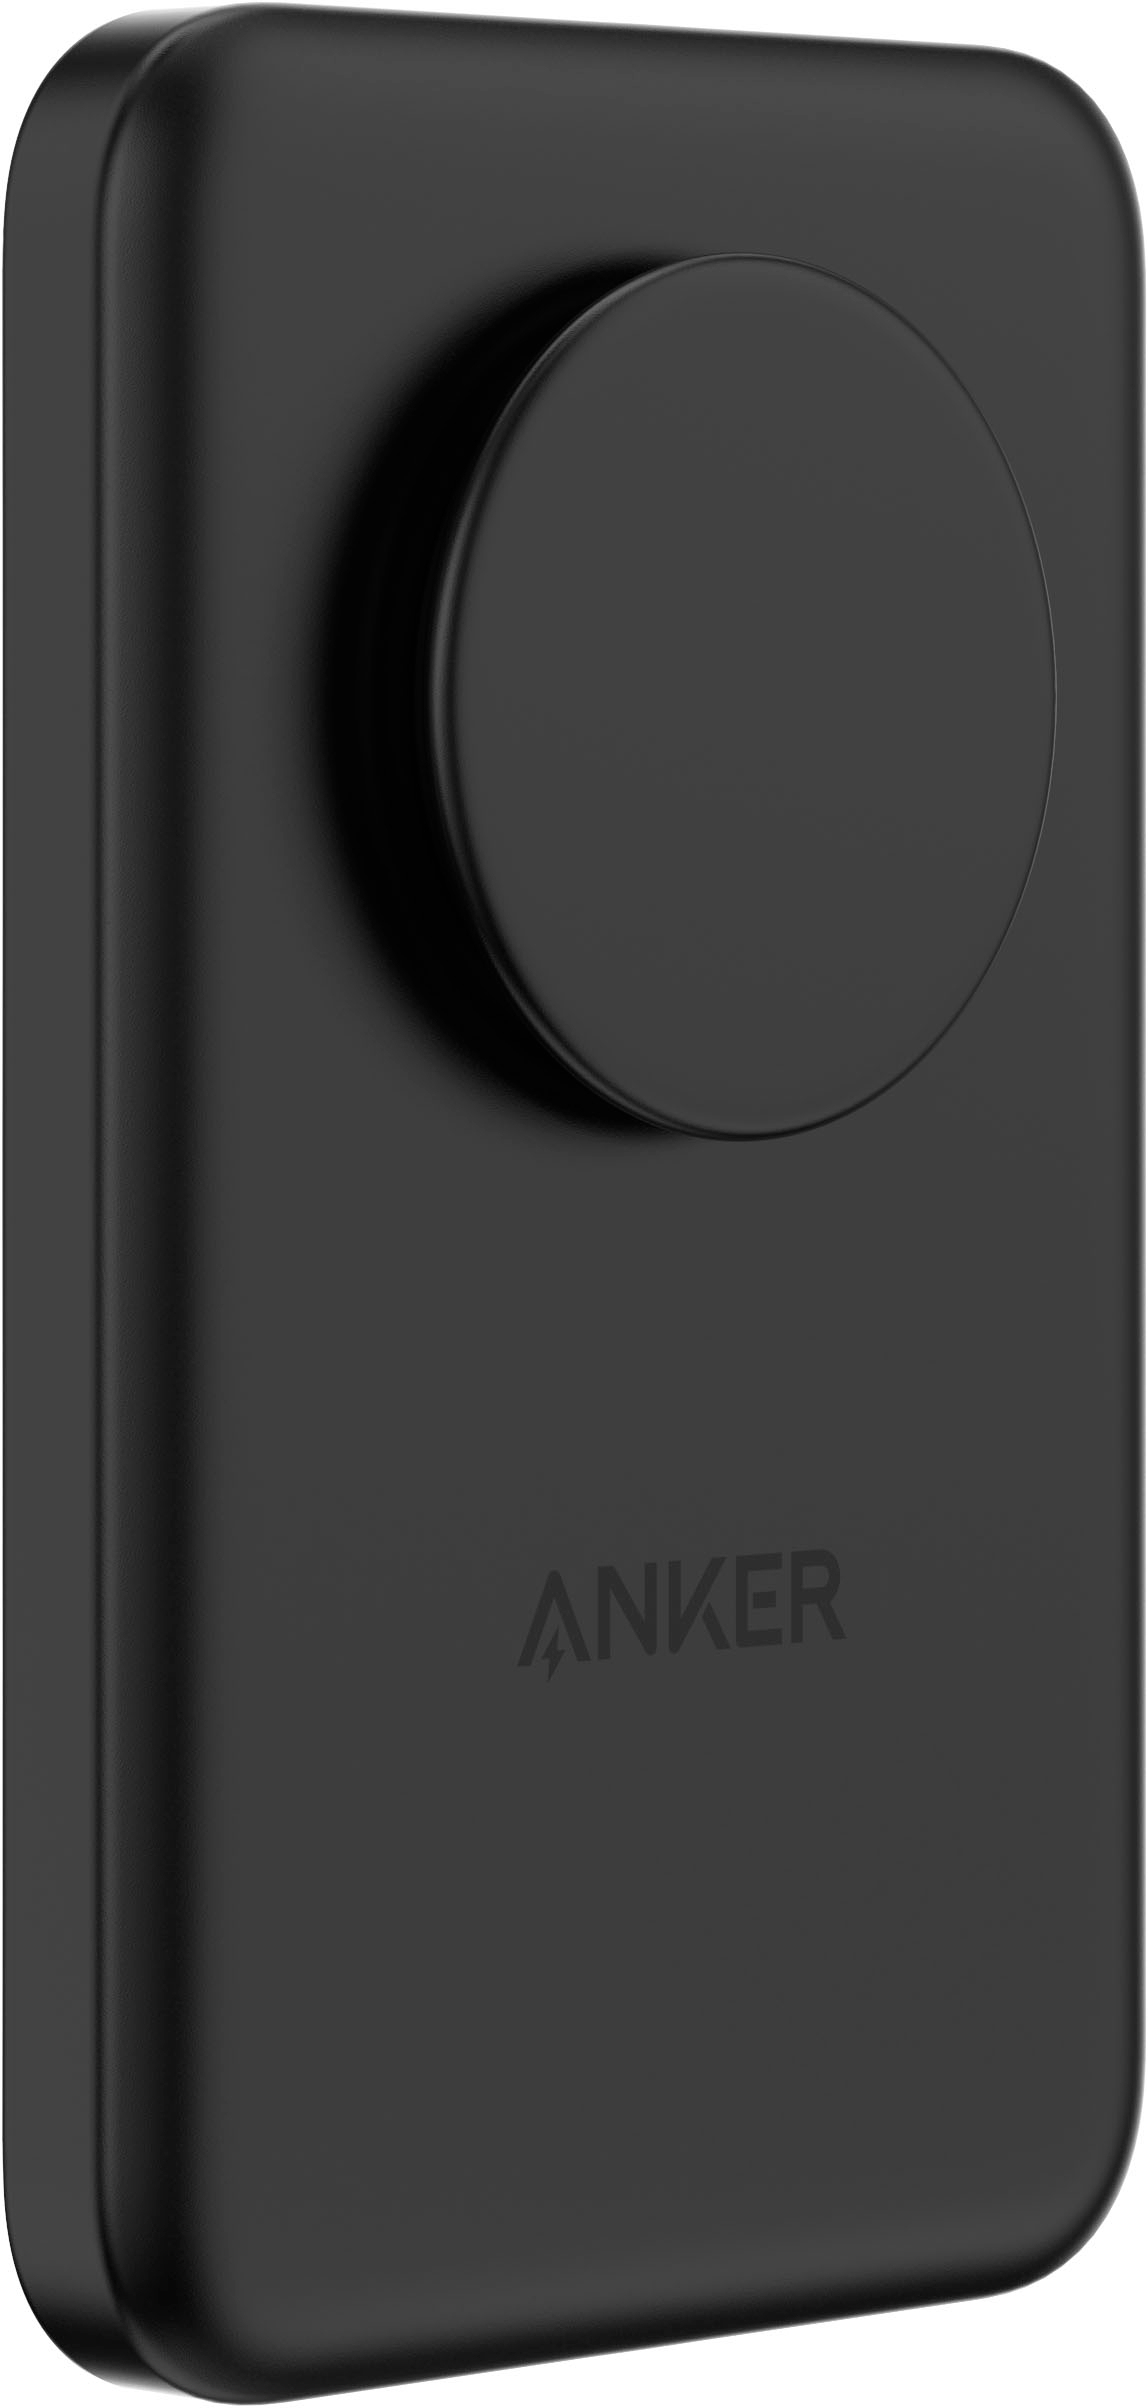 PopSockets x Anker MagGo 5,000 mAh Portable Magnetic Battery Charger with Grip MagSafe Compatible Devices Black - Best Buy